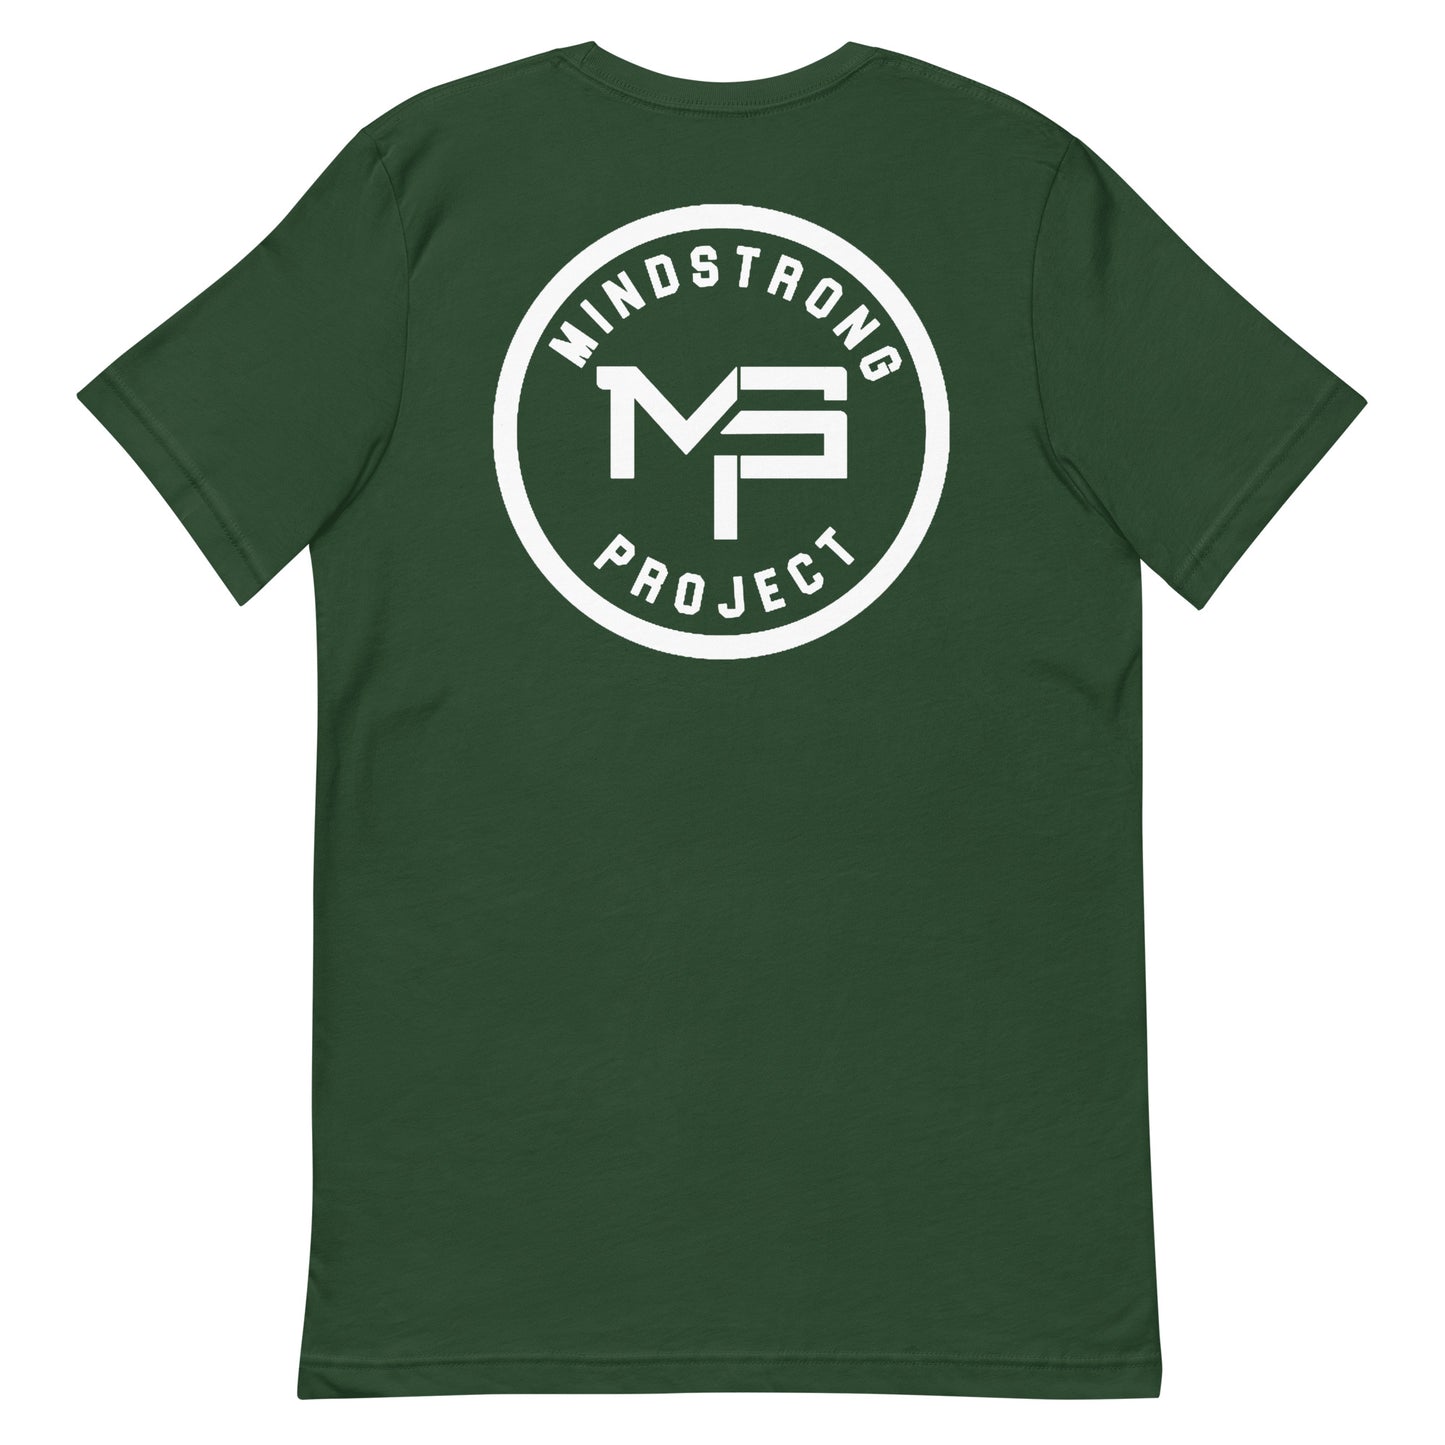 THE MINDSTRONG PROJECT RETURN TO NATURE T-SHIRT (MORE COLORS)